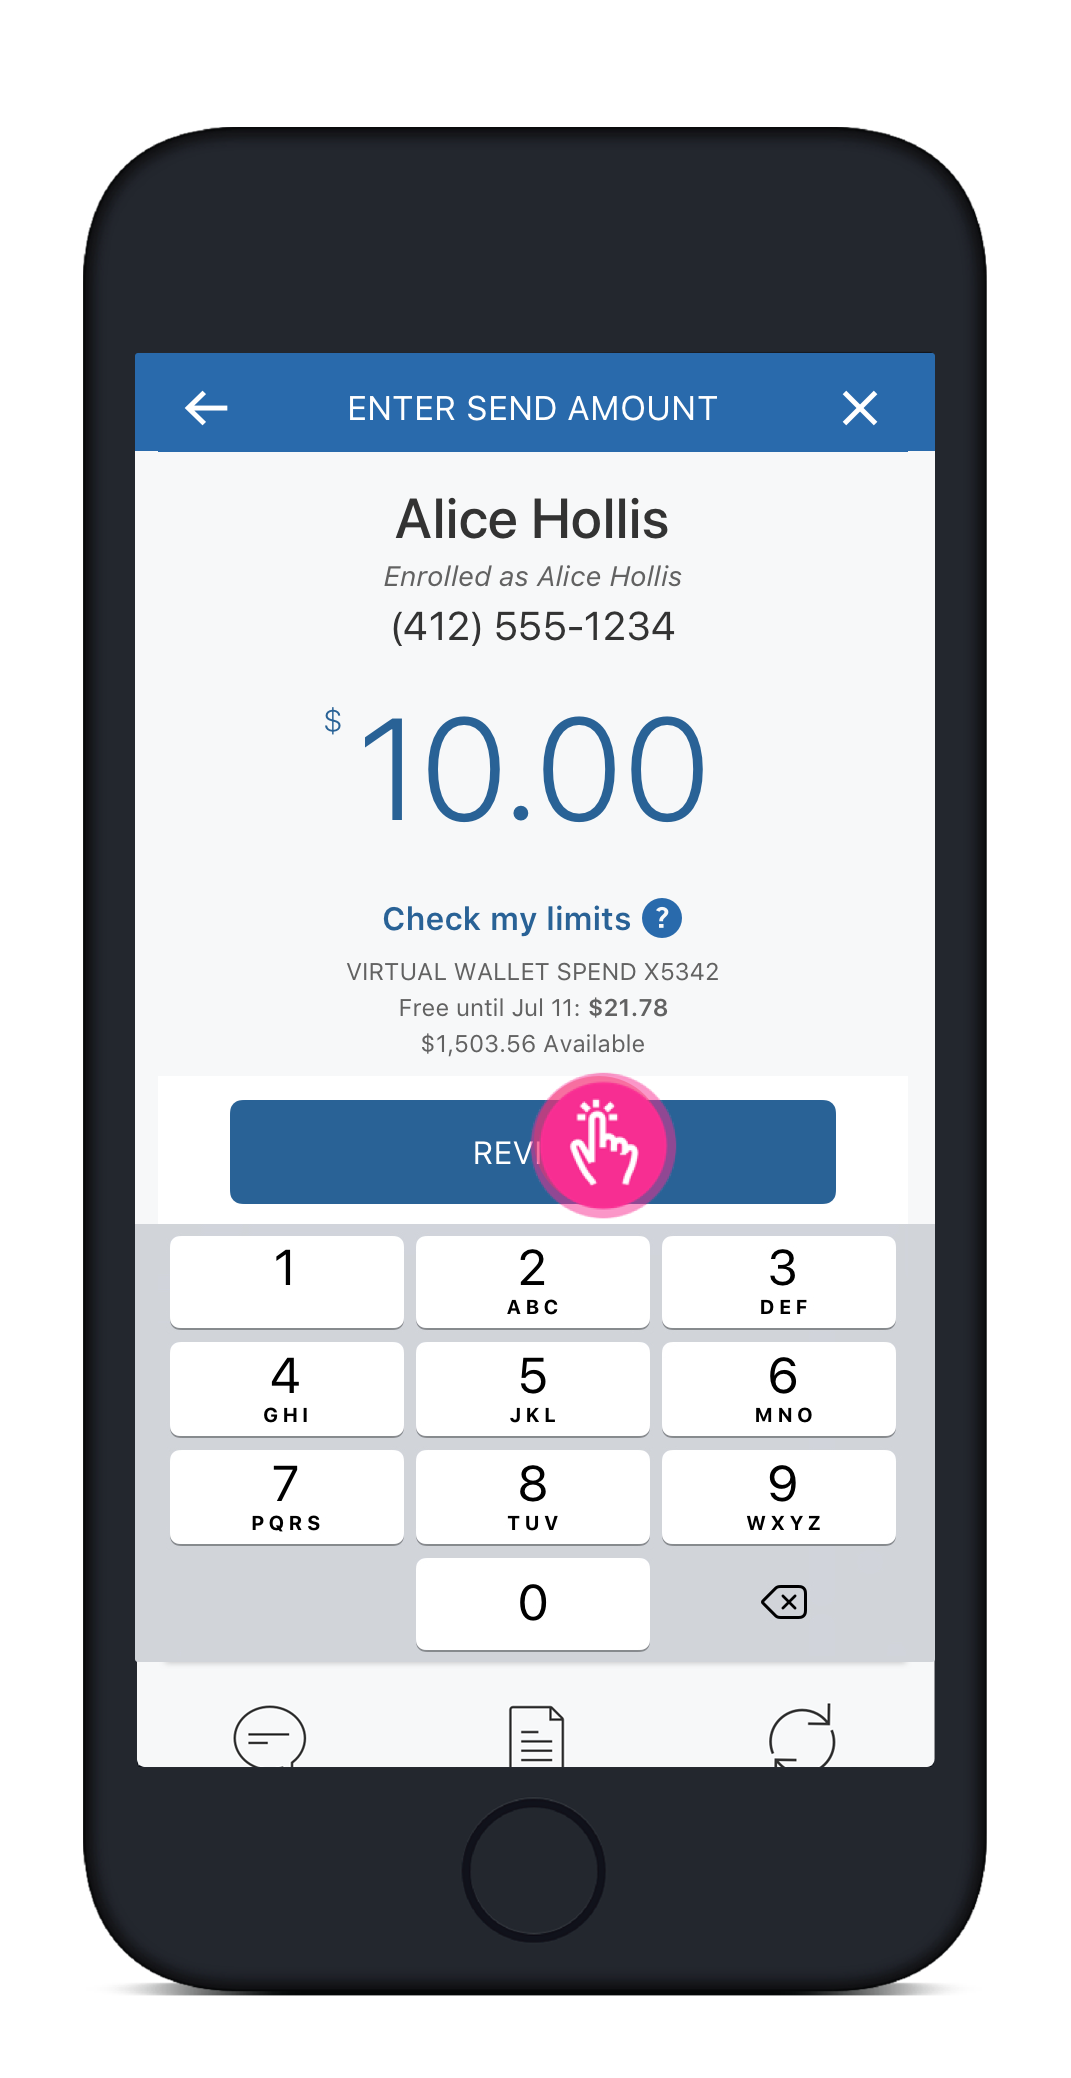 Screenshot of the Enter Send Amount page in the PNC Mobile app with Review button highlighted